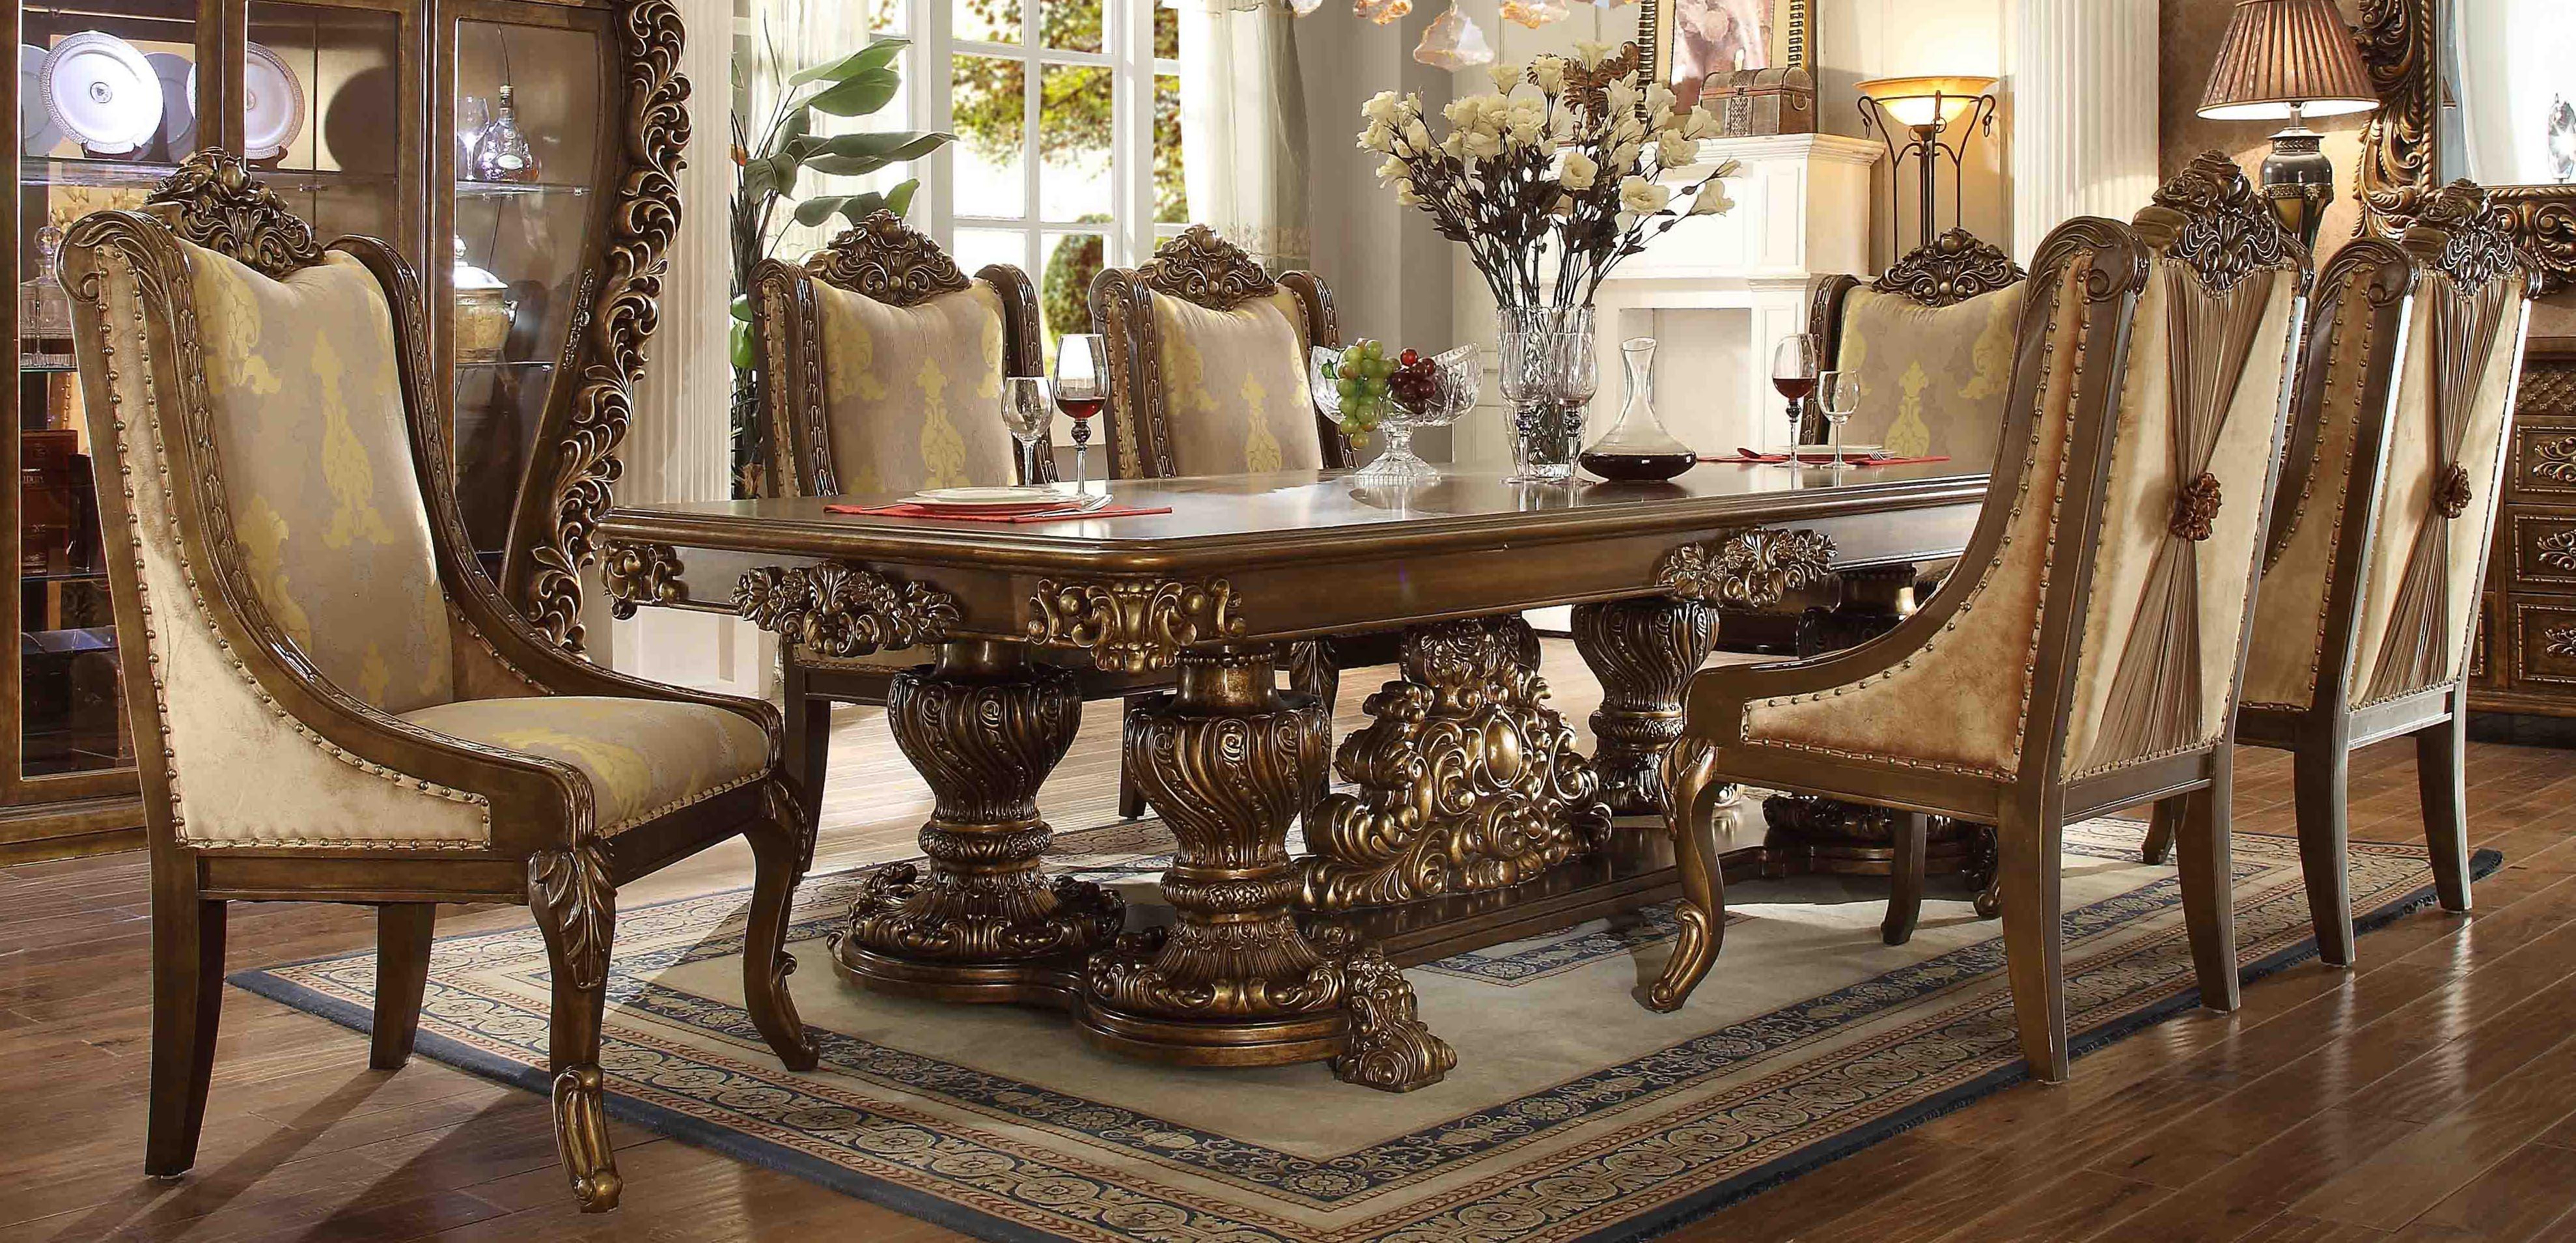 Traditional Dining Table Set HD-8011 – 7PC DINING TABLE SET HD-8011-DTSET7 in Gold Finish, Cream, Walnut Fabric